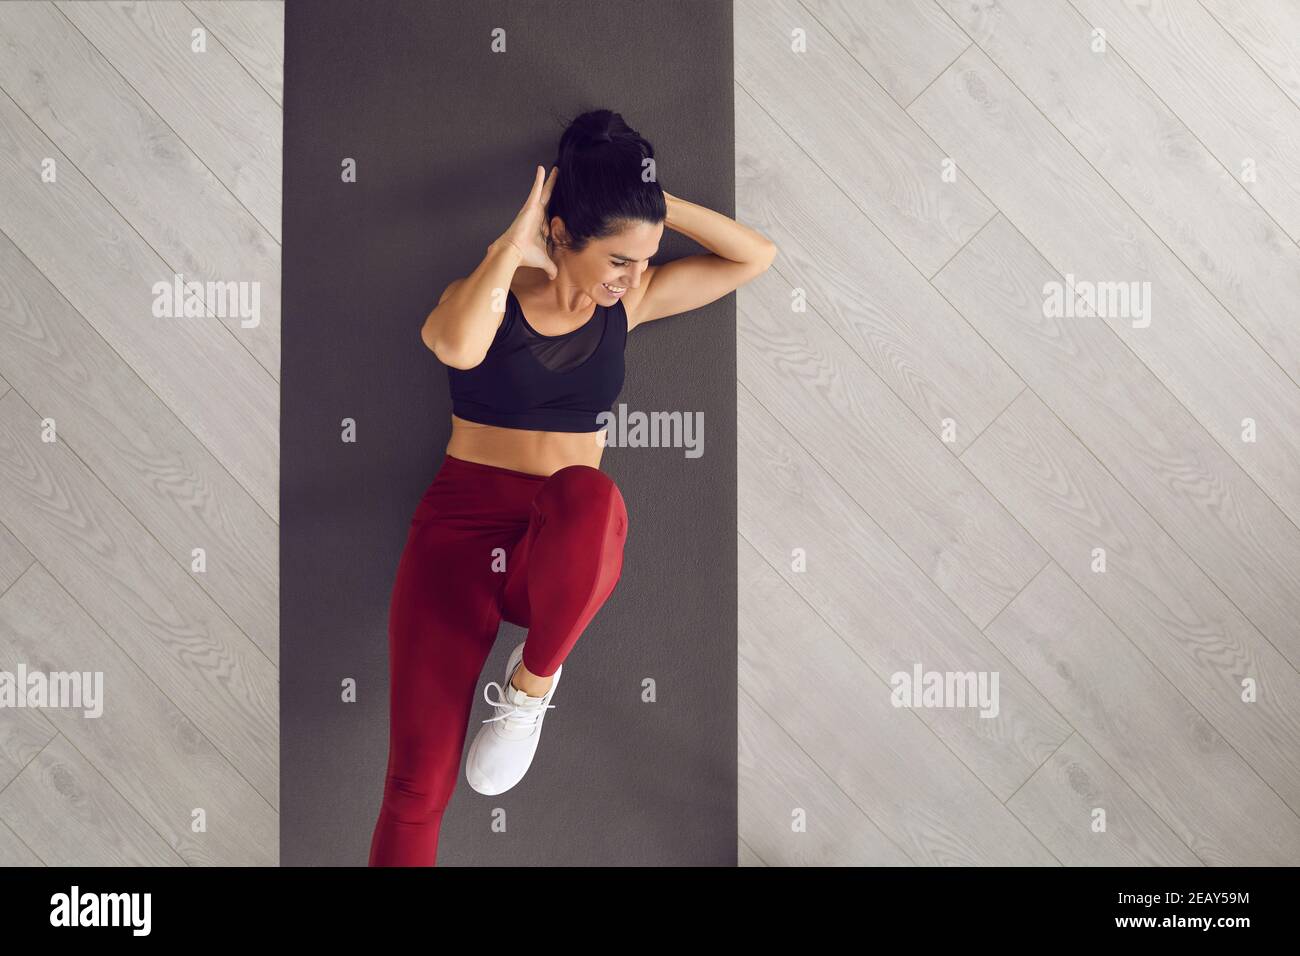 Top view of sporty active woman doing cross training bicycle crunches trains leg muscles and abs. Stock Photo